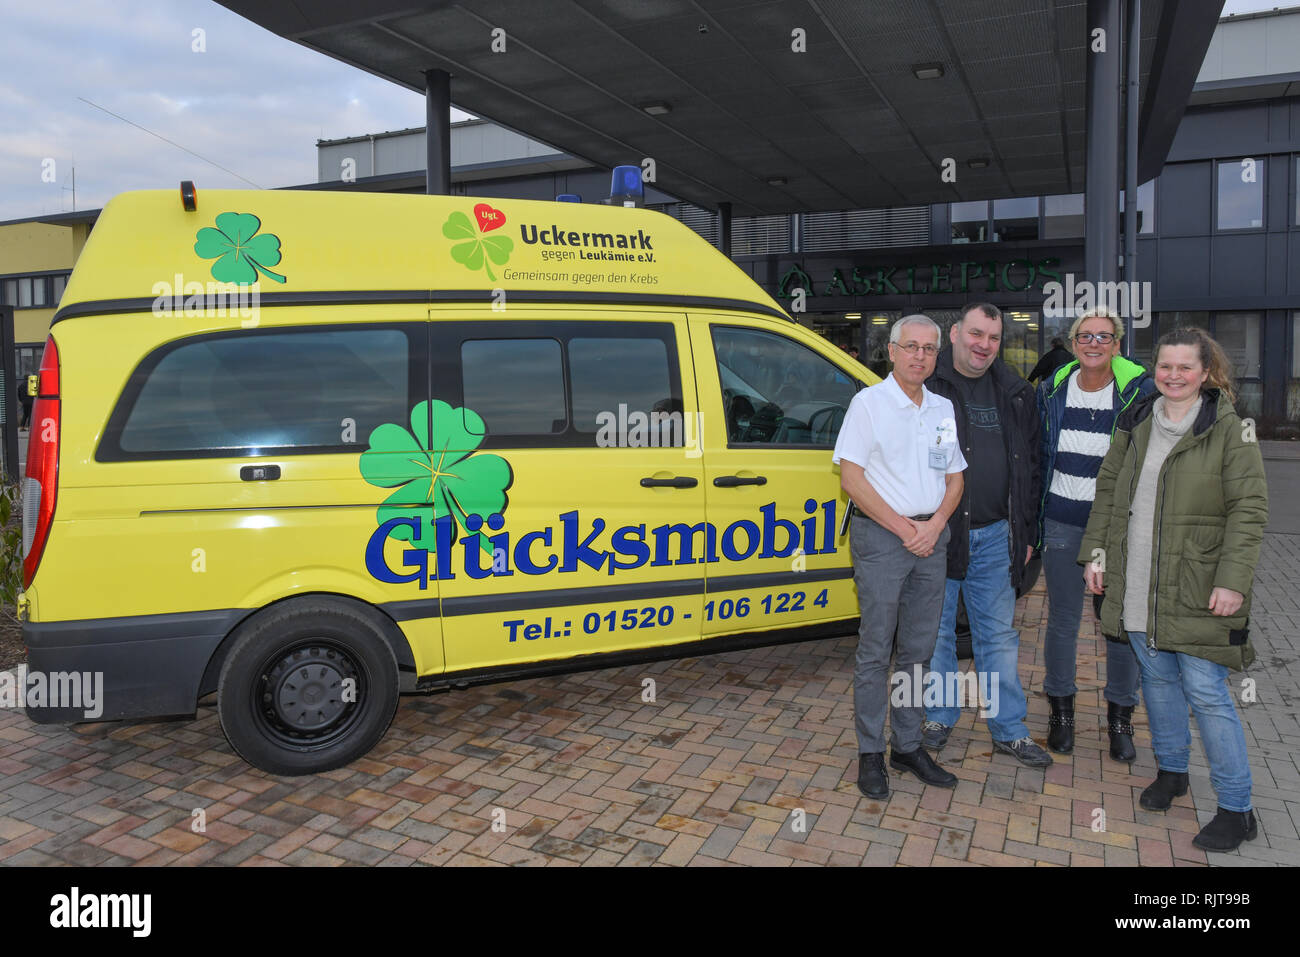 31 January 2019, Brandenburg, Schwedt: Beside the luck mobile of the association Uckermark against leukaemia registered association Axel Matzdorff (l-r), Chefarzt for internal medicine in the Asklepios hospital Schwedt (Uckermark), as well as the association members Enrico Wendt, Antje Kayser and the chairman Ines tree garden stand. When the remaining life time is short due to a fatal disease, people who are affected often have long cherished but never fulfilled dreams. In the Uckermark, an association wants to help fulfil them so that the sick person can "let go without a wish". Photo: Patric Stock Photo